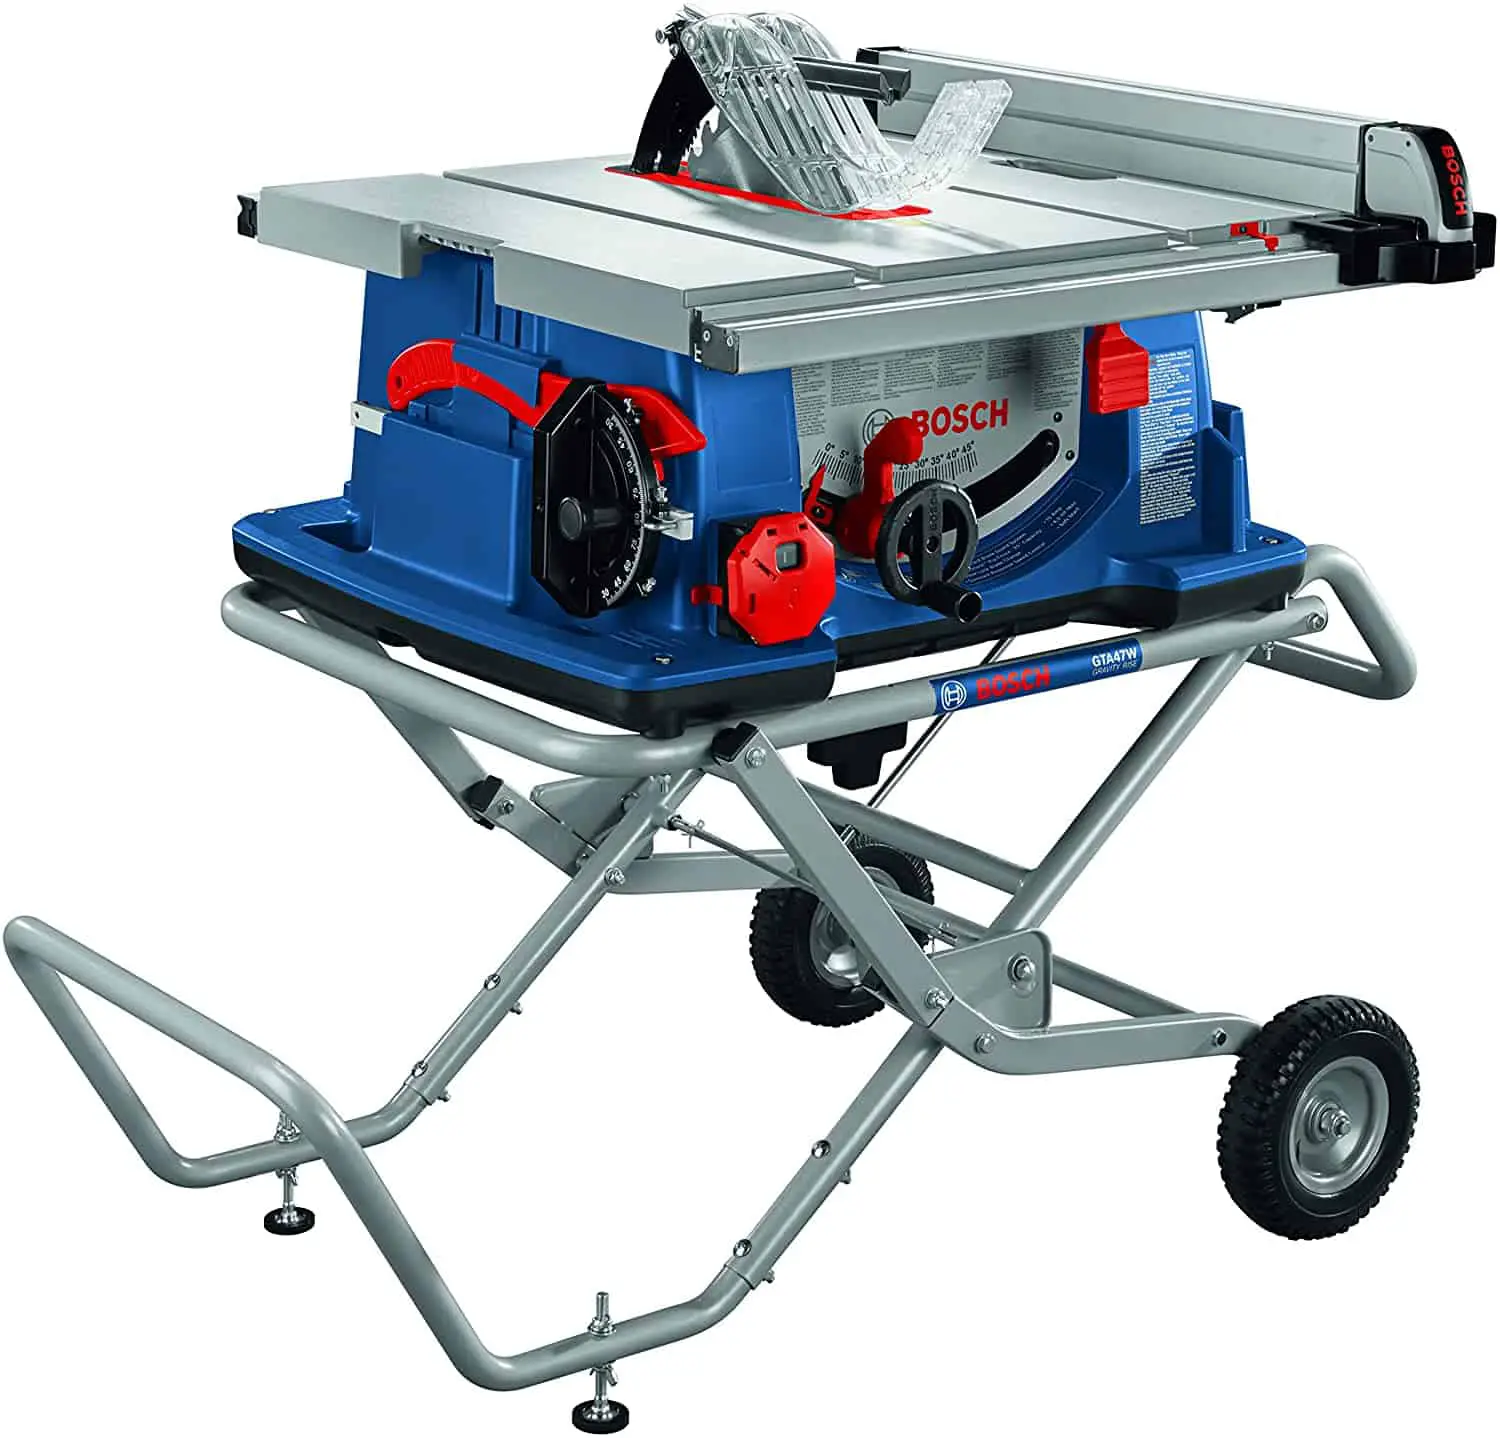 Best worksite table saw with gravity rise stand: Bosch 4100XC-10